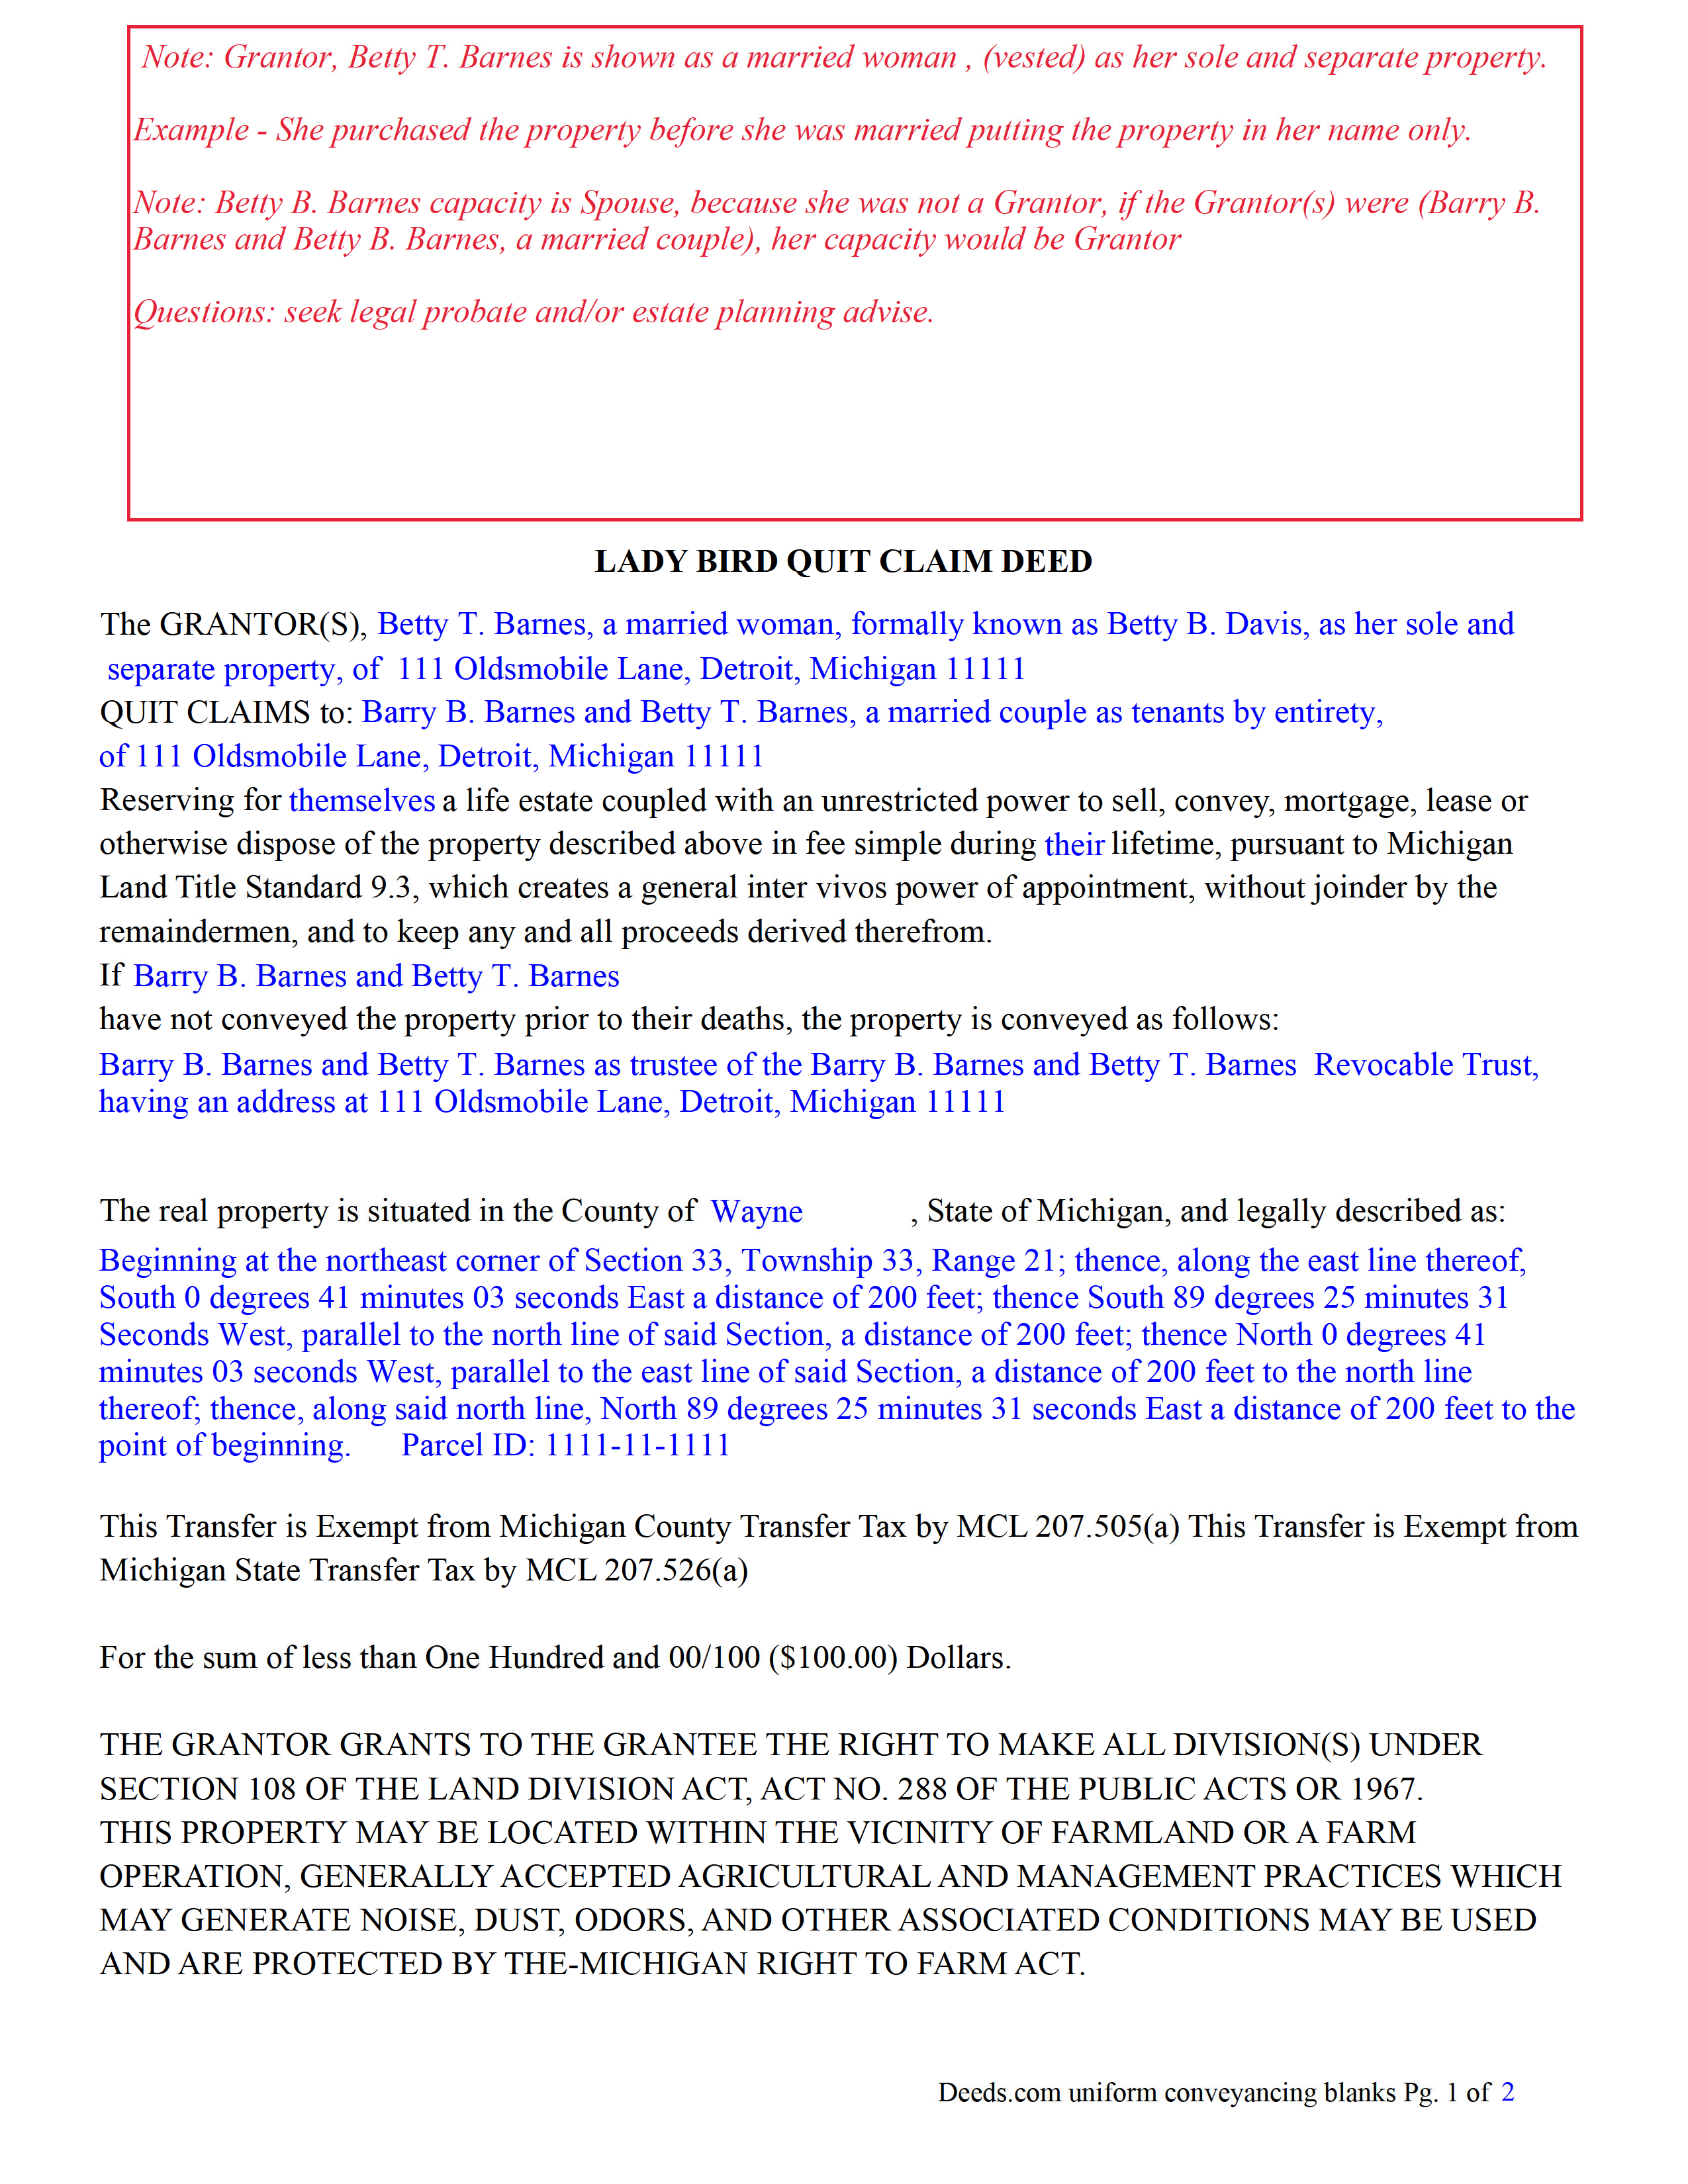 Completed Example Version 2 of the Lady Bird Quitclaim Deed Document